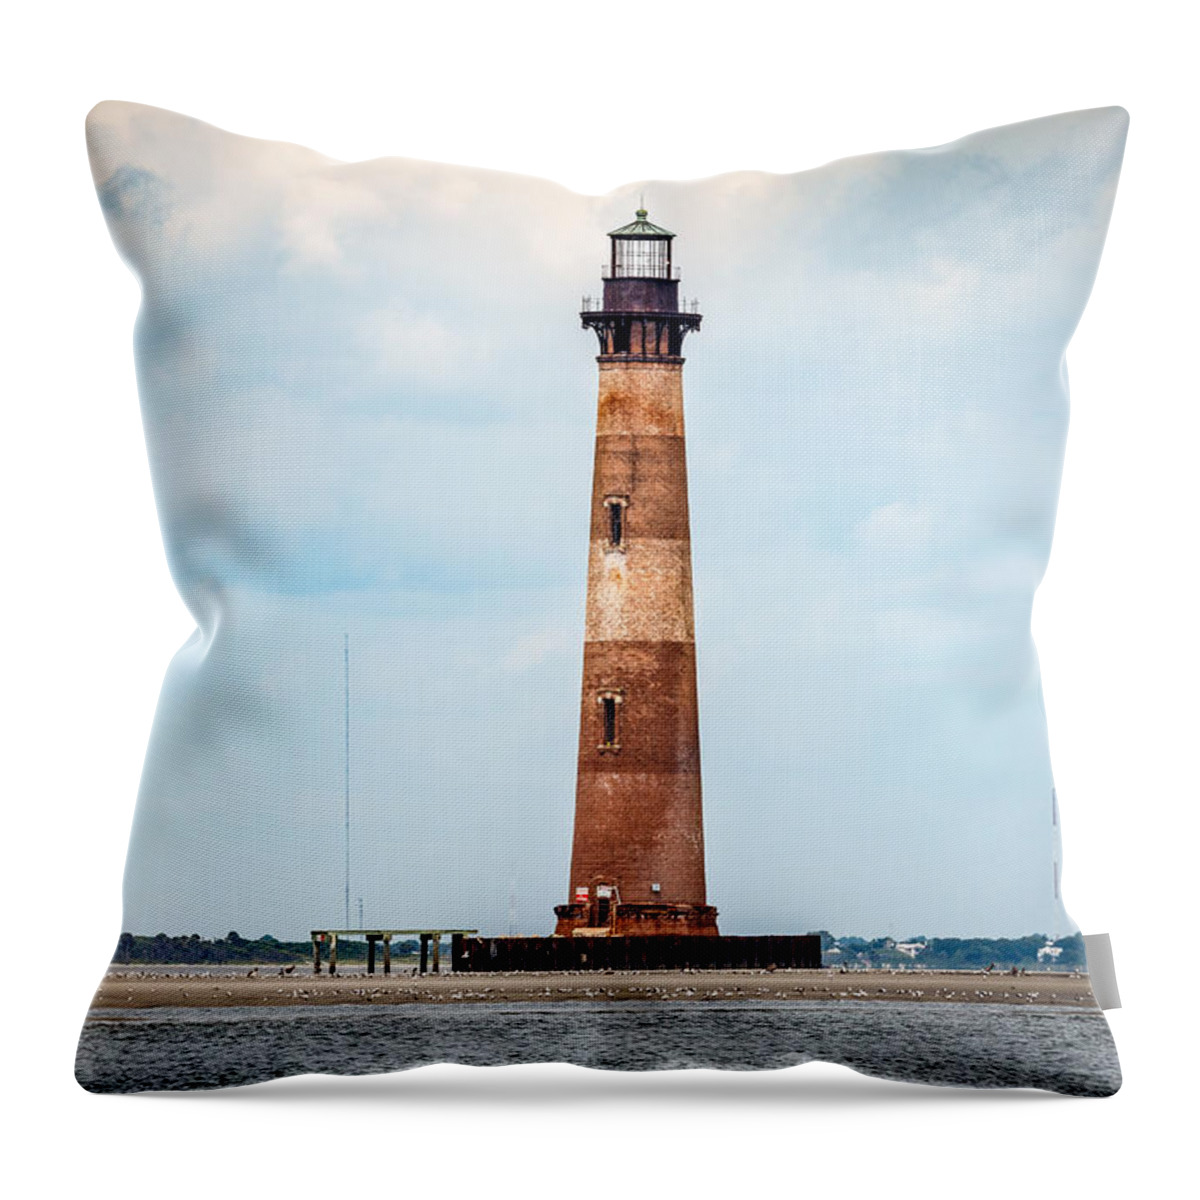 Architecture Throw Pillow featuring the photograph Morris Island Lighthouse #1 by Doug Long